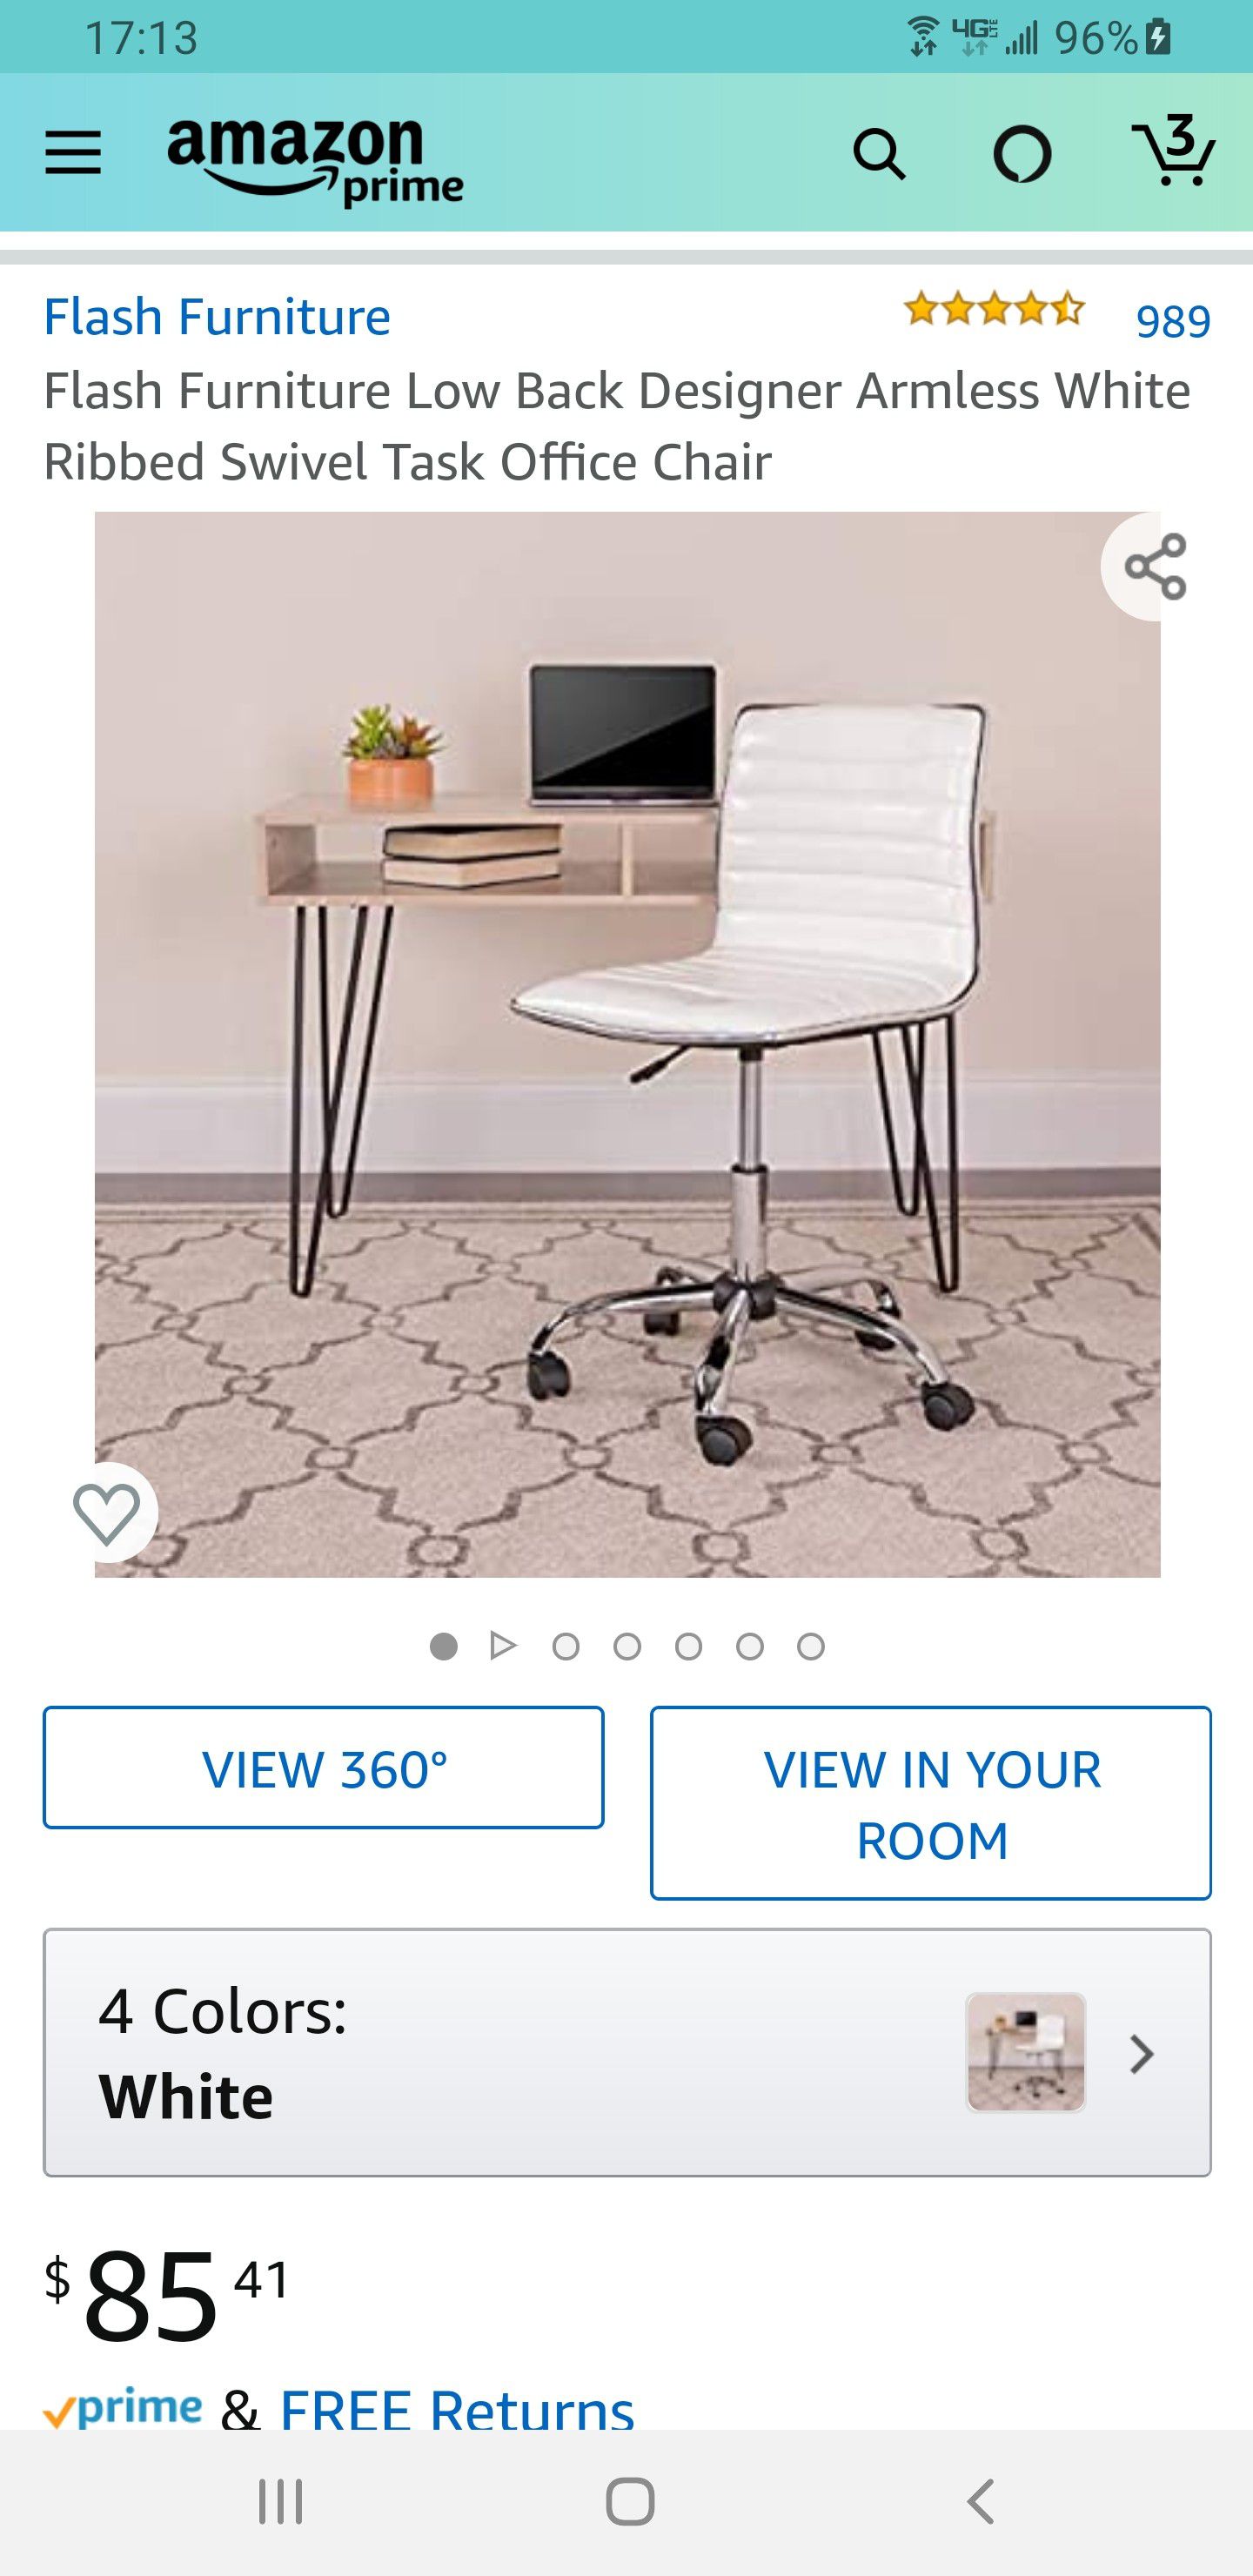 AWESOME DEAL! Office/desk chair